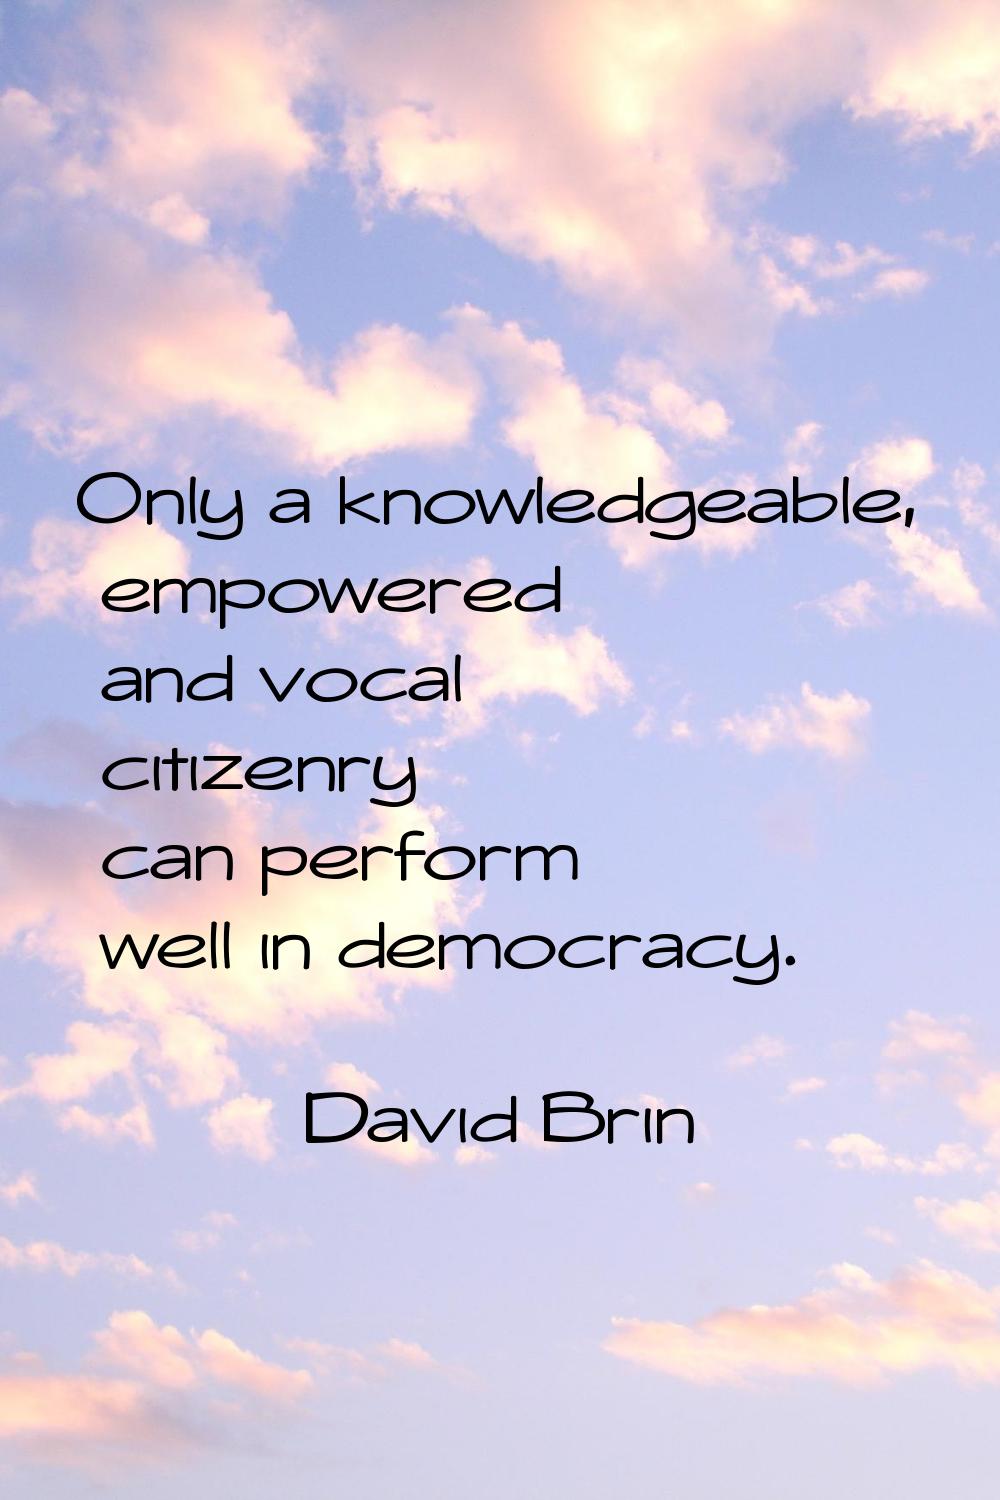 Only a knowledgeable, empowered and vocal citizenry can perform well in democracy.